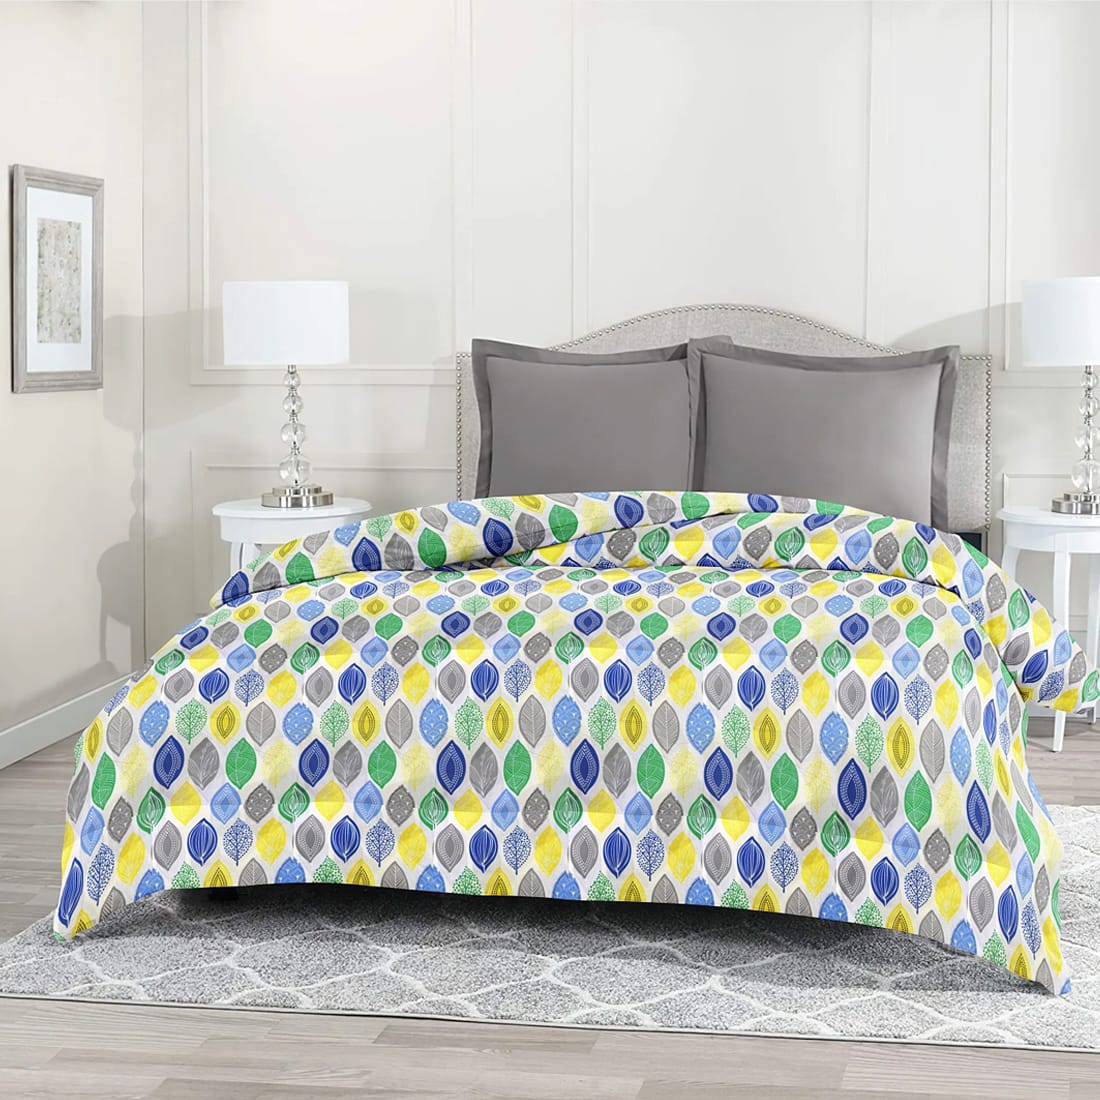 Feathers Print Blue Cotton Duvet Vecotor Pattern Cover online in India